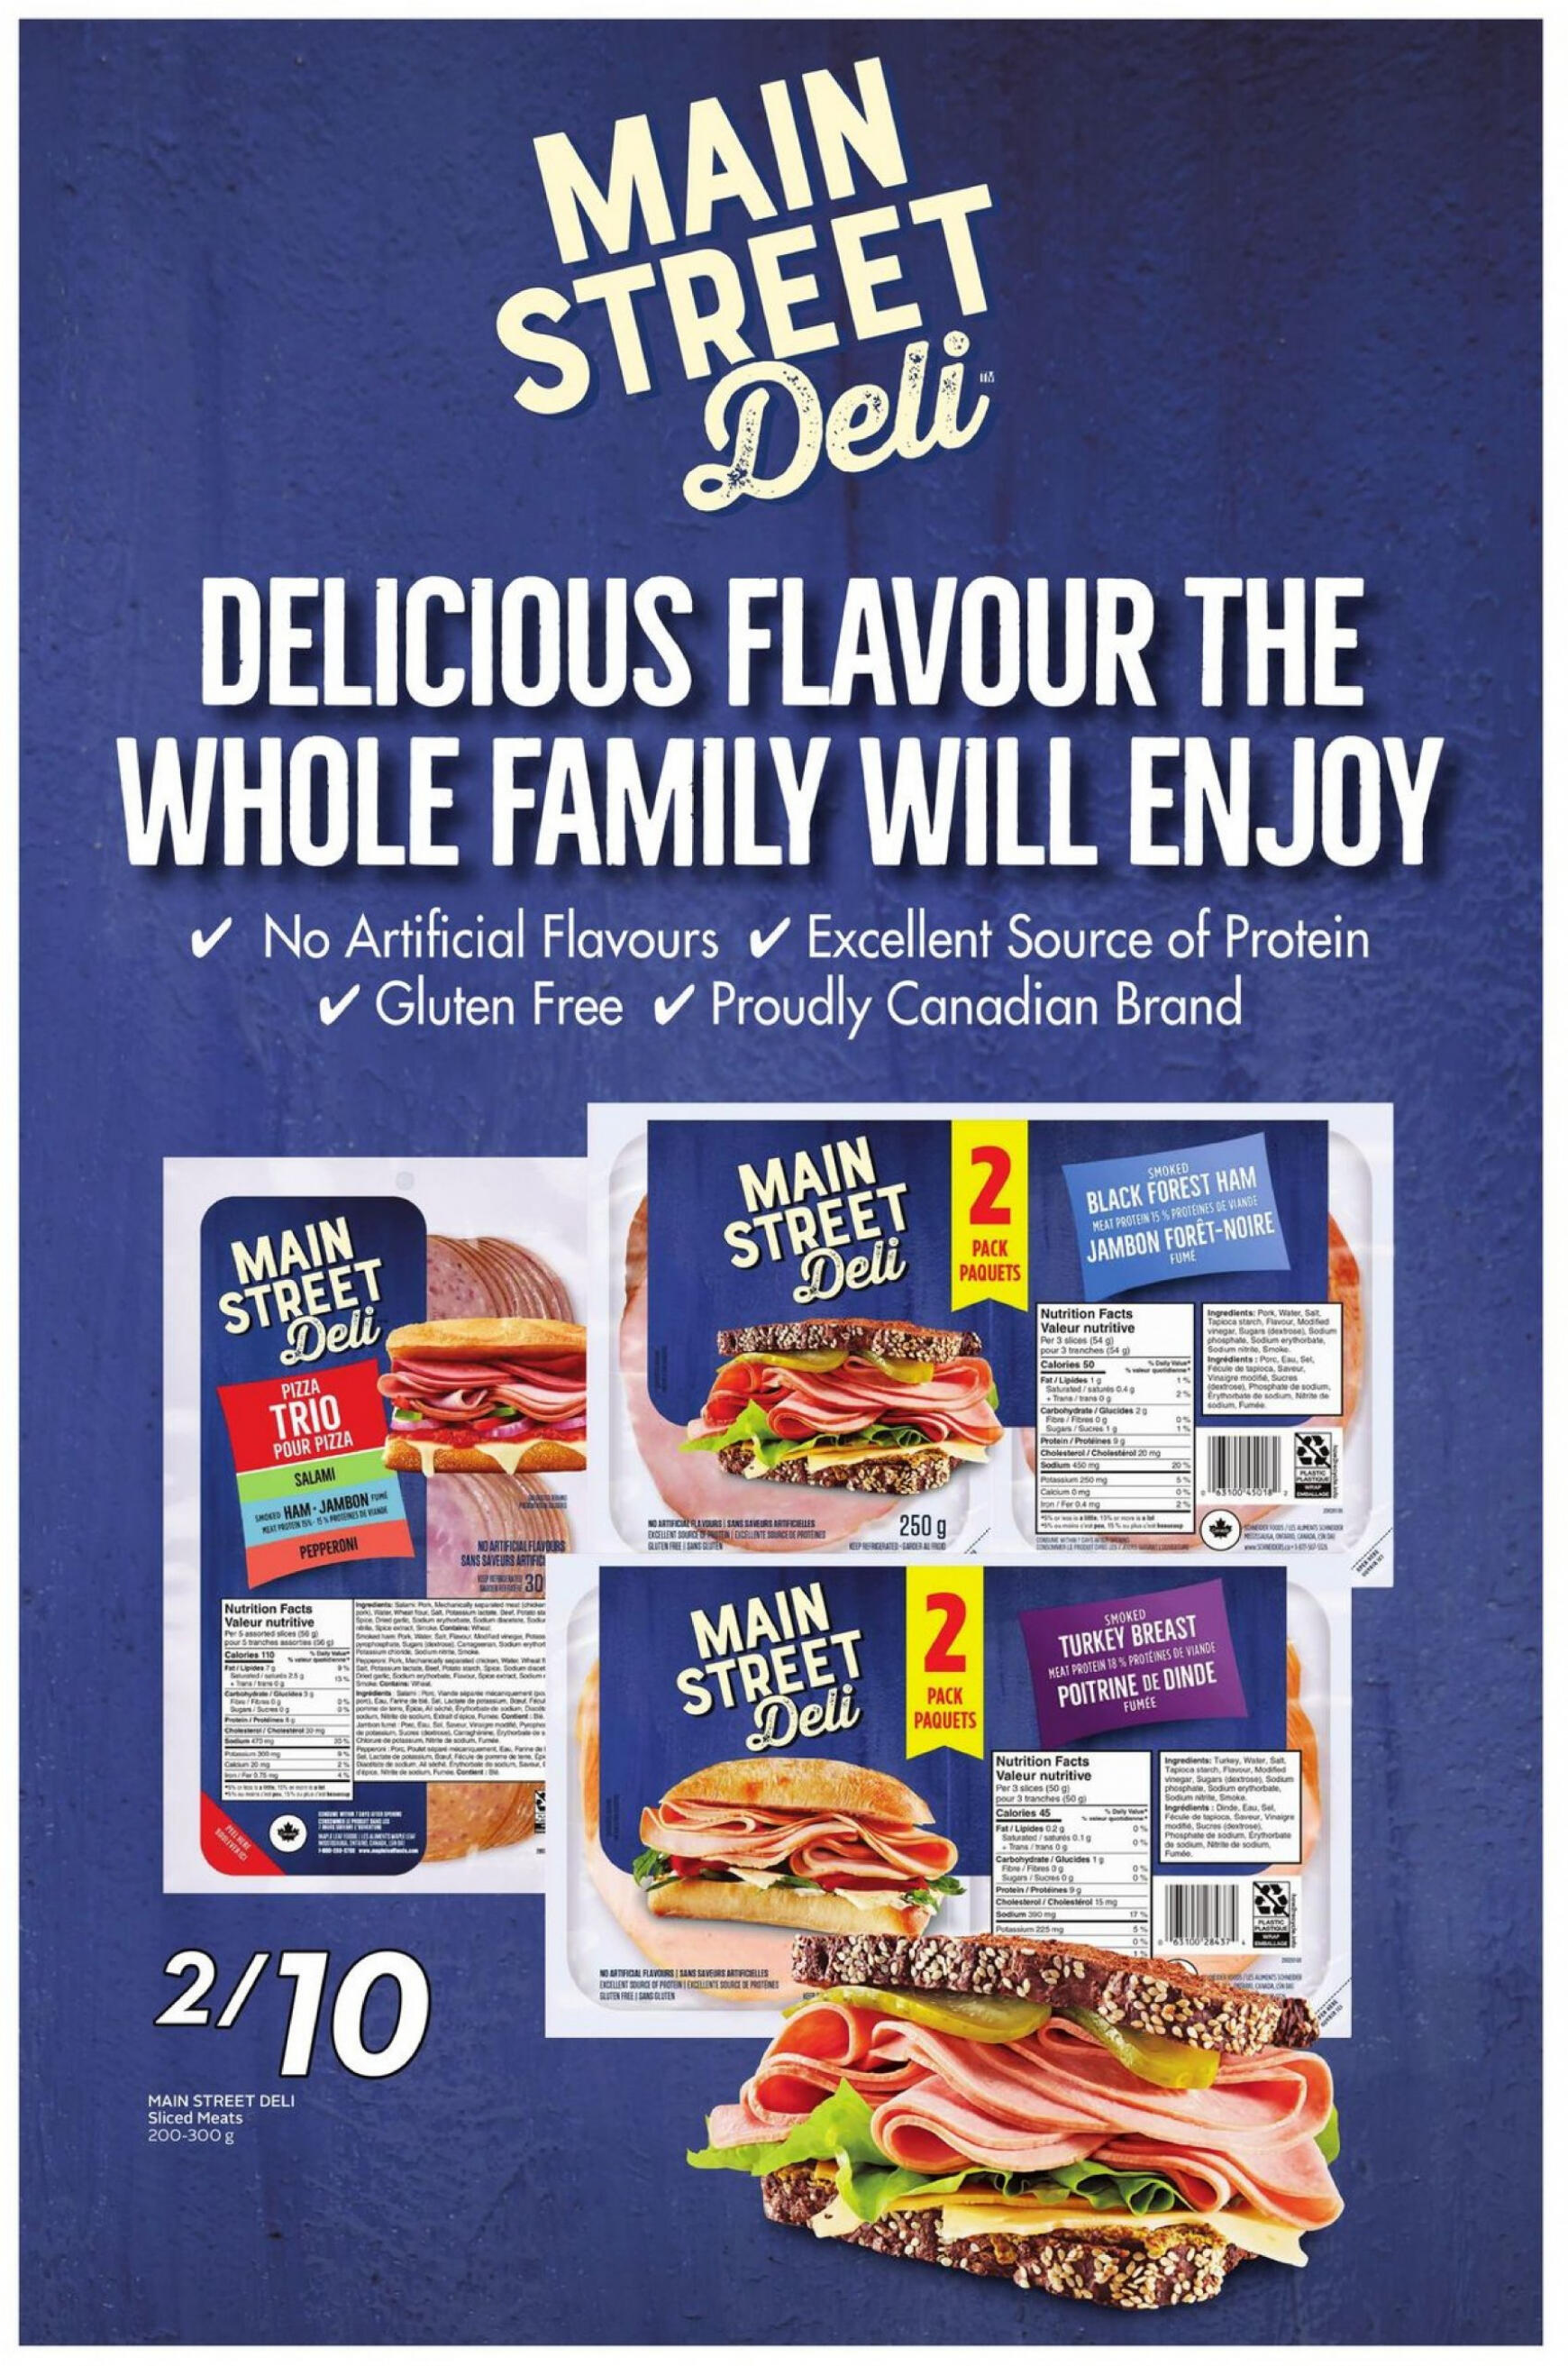 sobeys - Sobeys - Weekly Flyer - Ontario flyer current 23.05. - 29.05. - page: 22